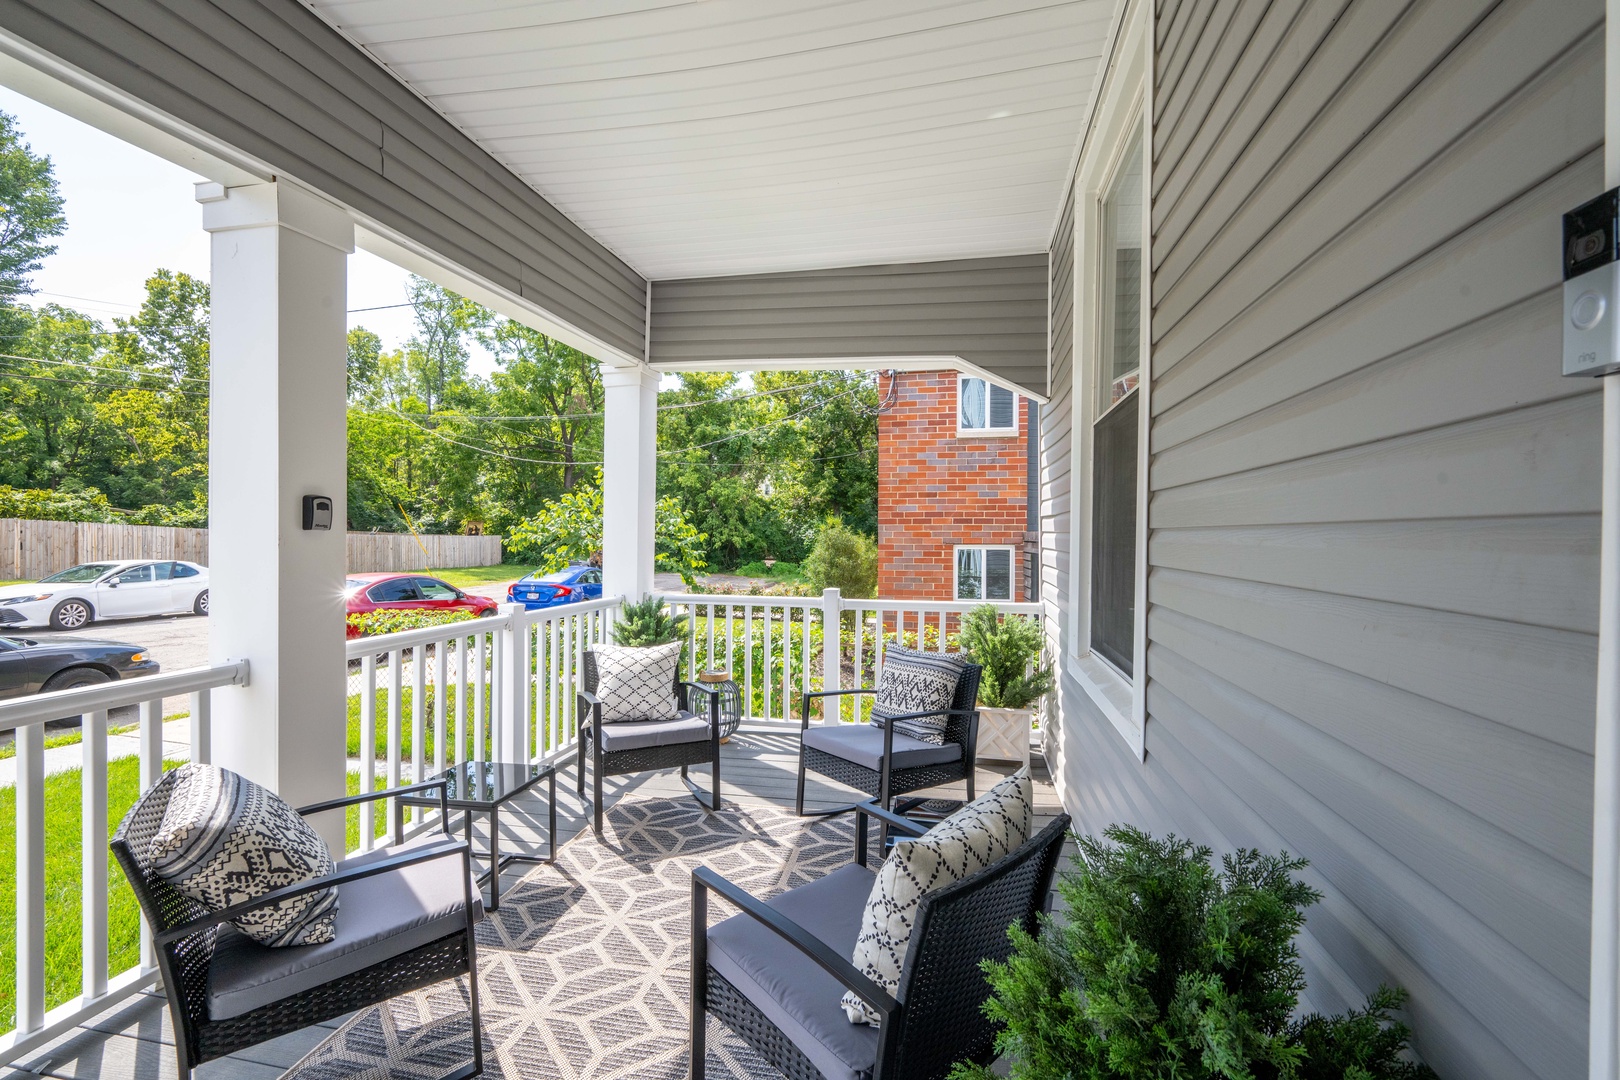 Relax & enjoy the fresh air on the spacious front porch